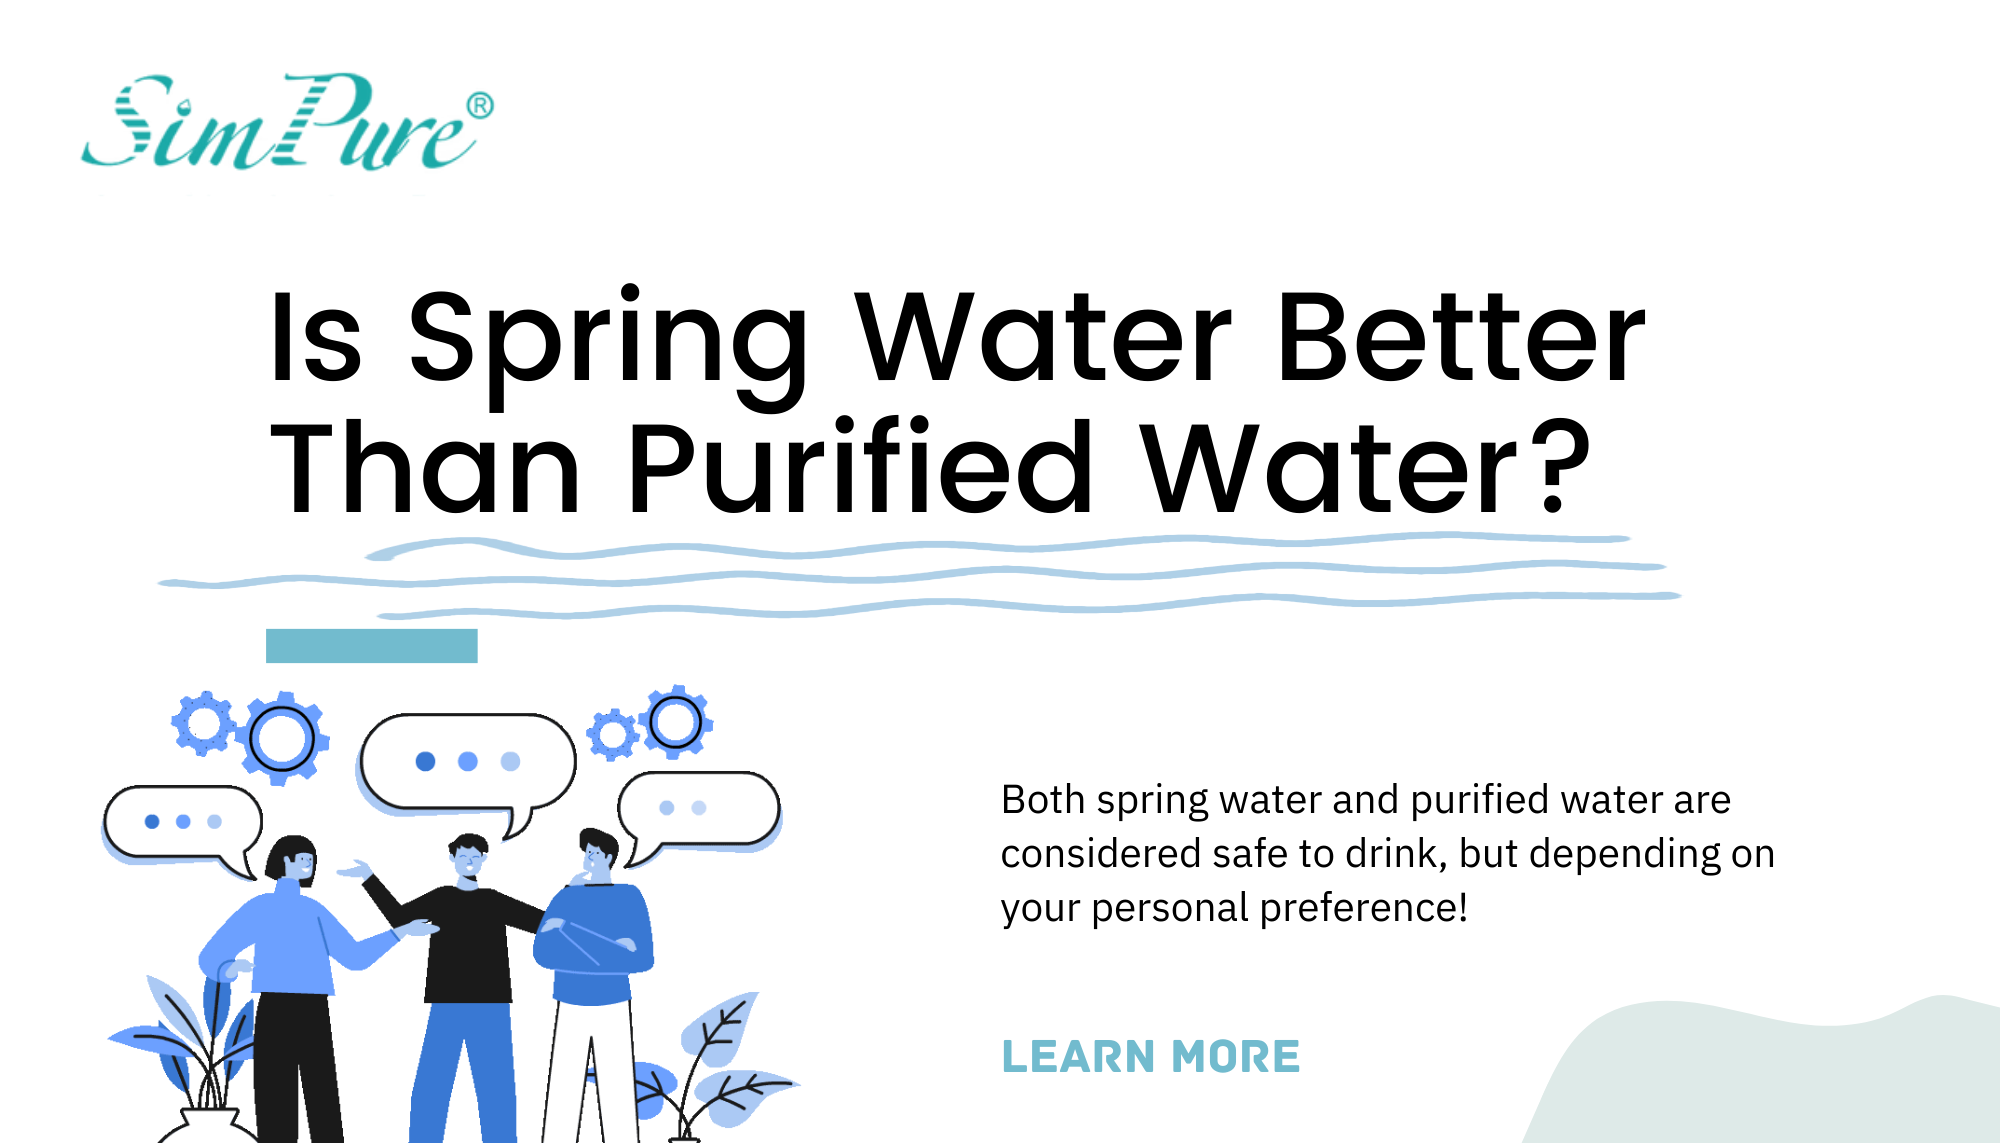 is spring water better than purified water